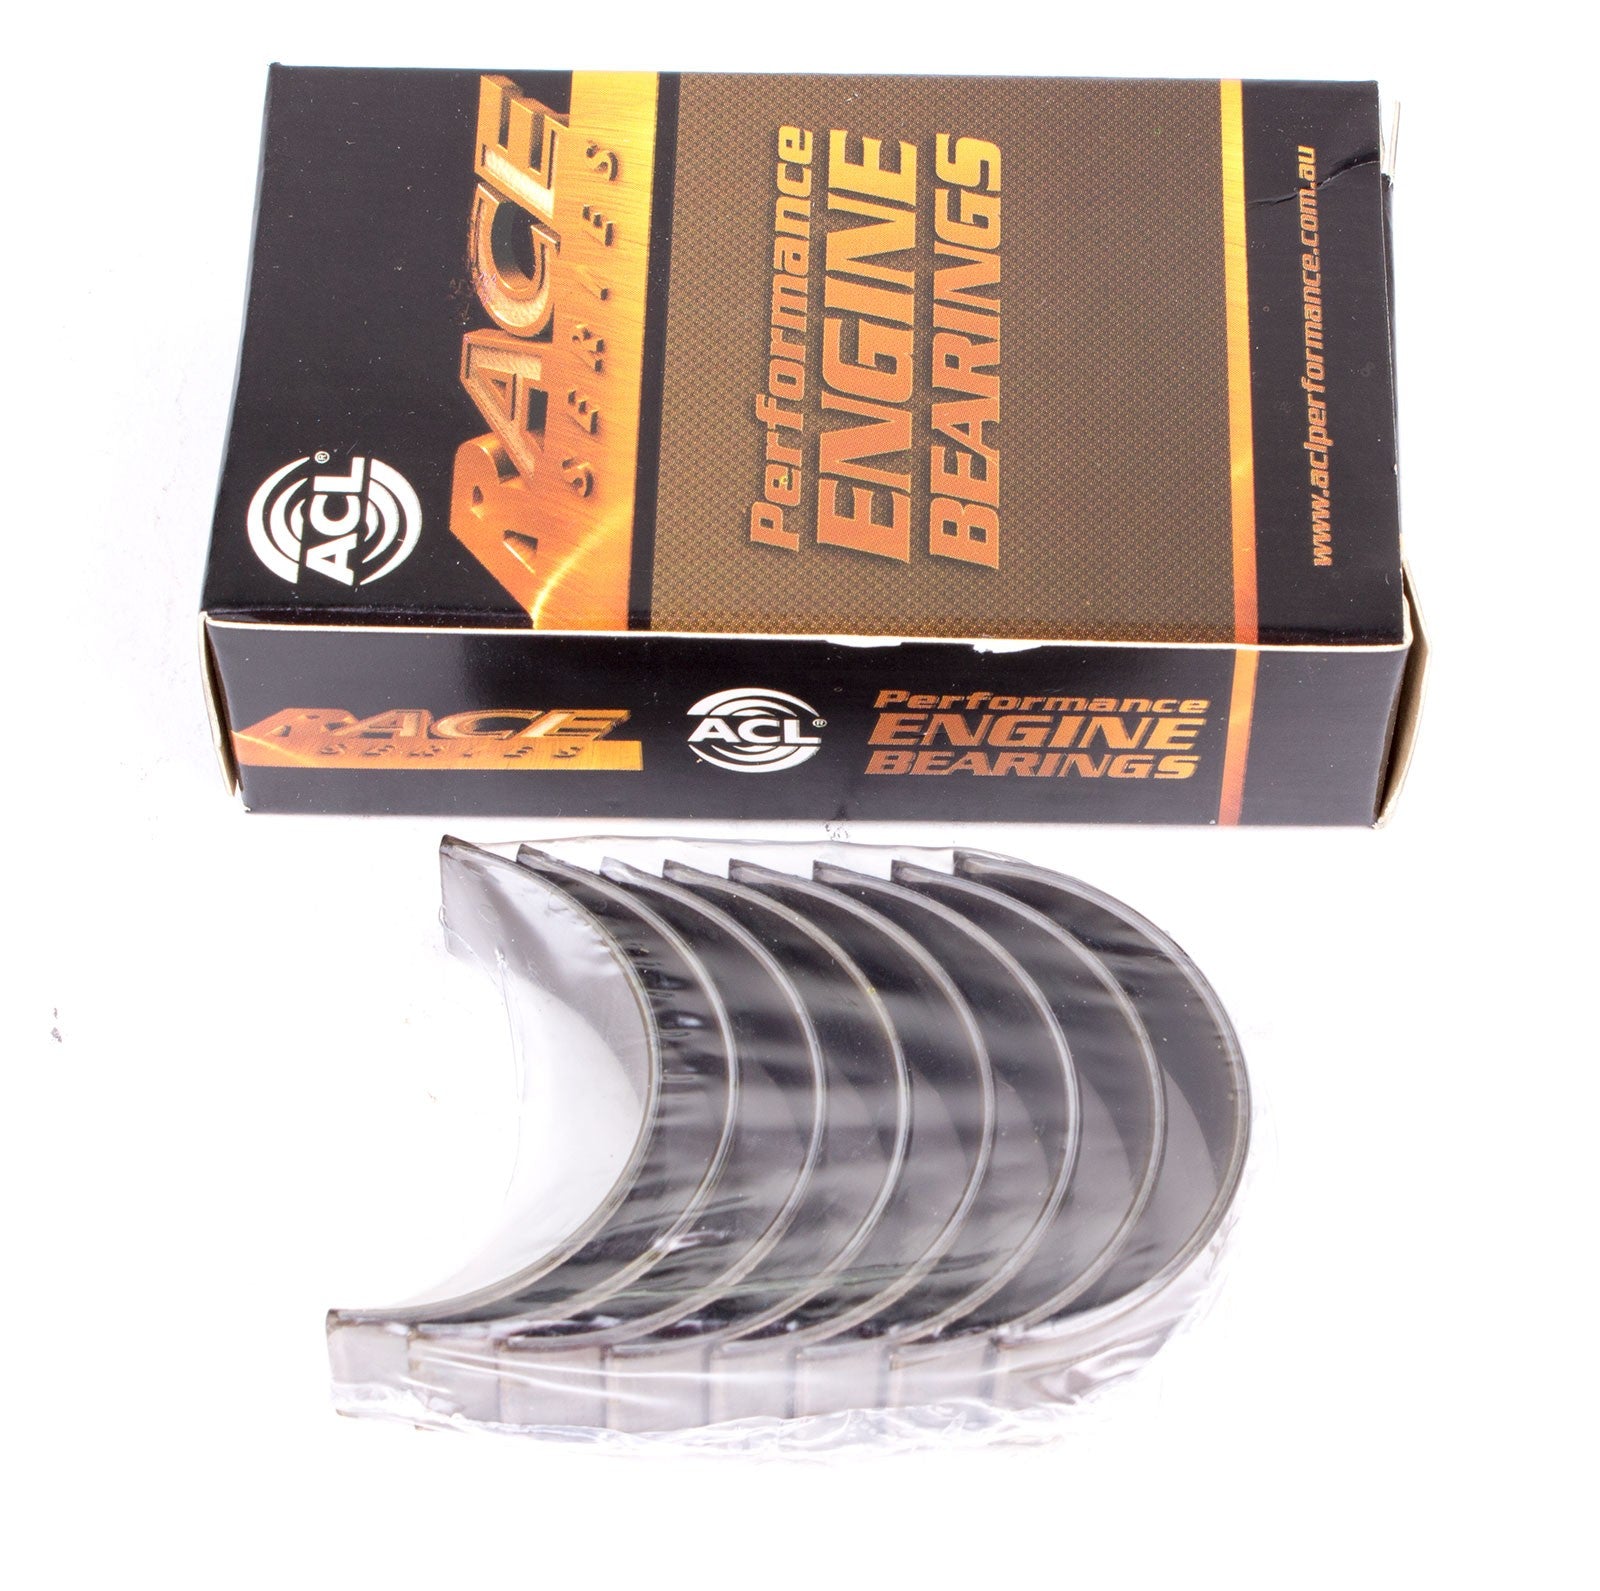 ACL 5M1038H-01 Main bearing set (ACL Race Series) Photo-0 